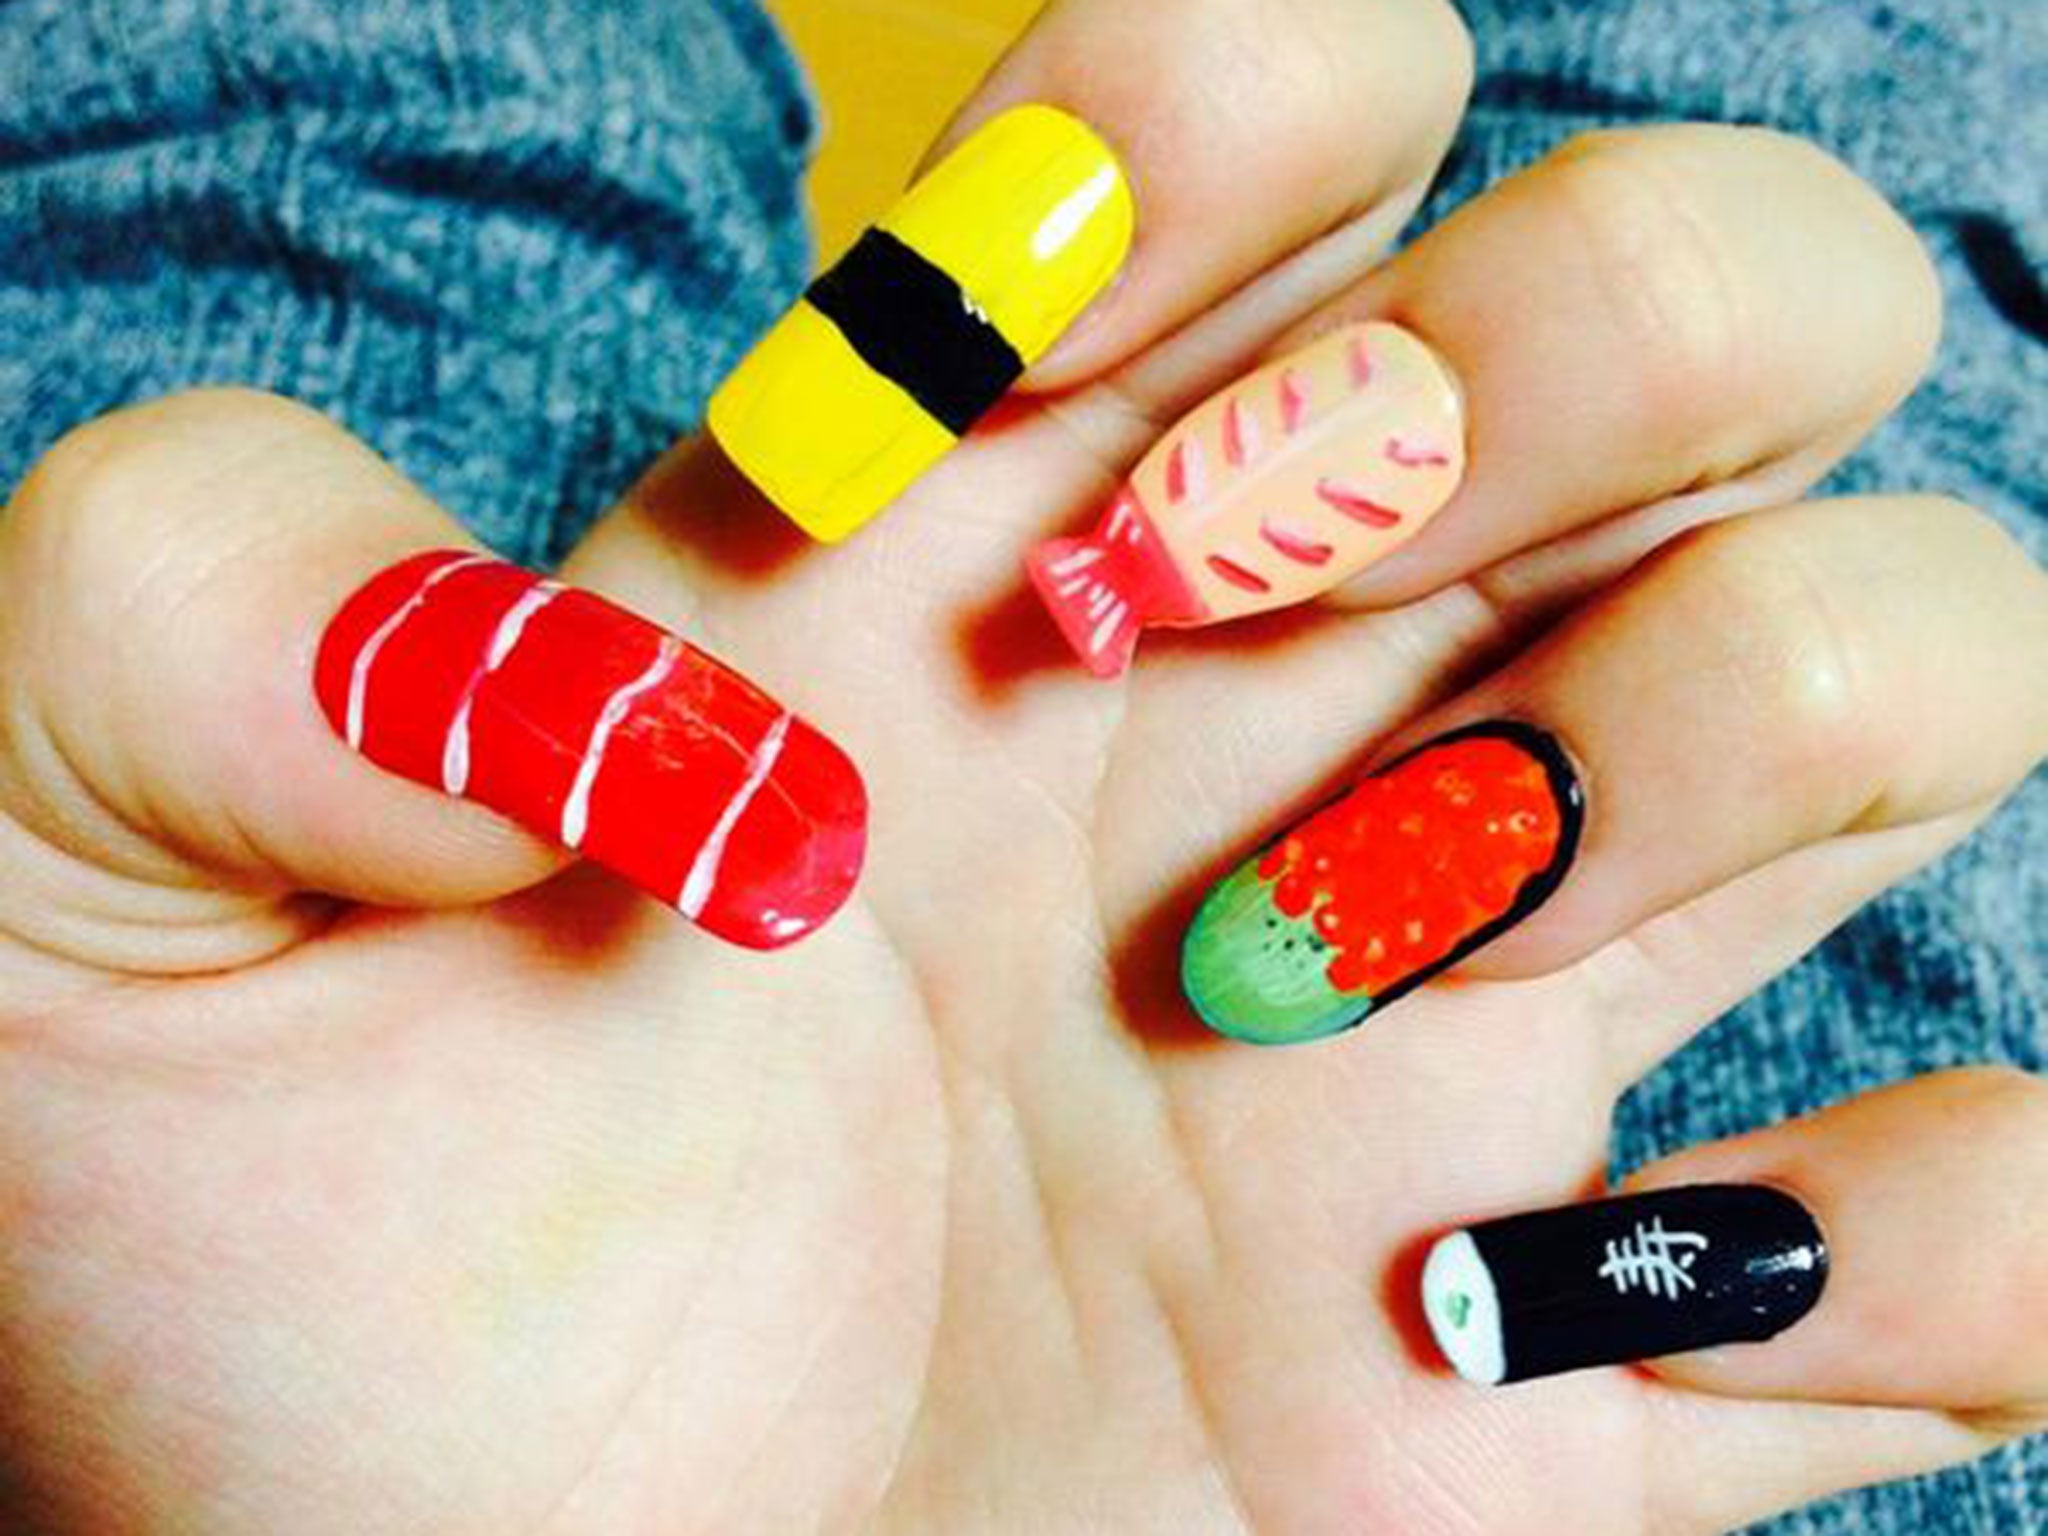 60 New Year's Nail Art Ideas that'll Make You Sparkle